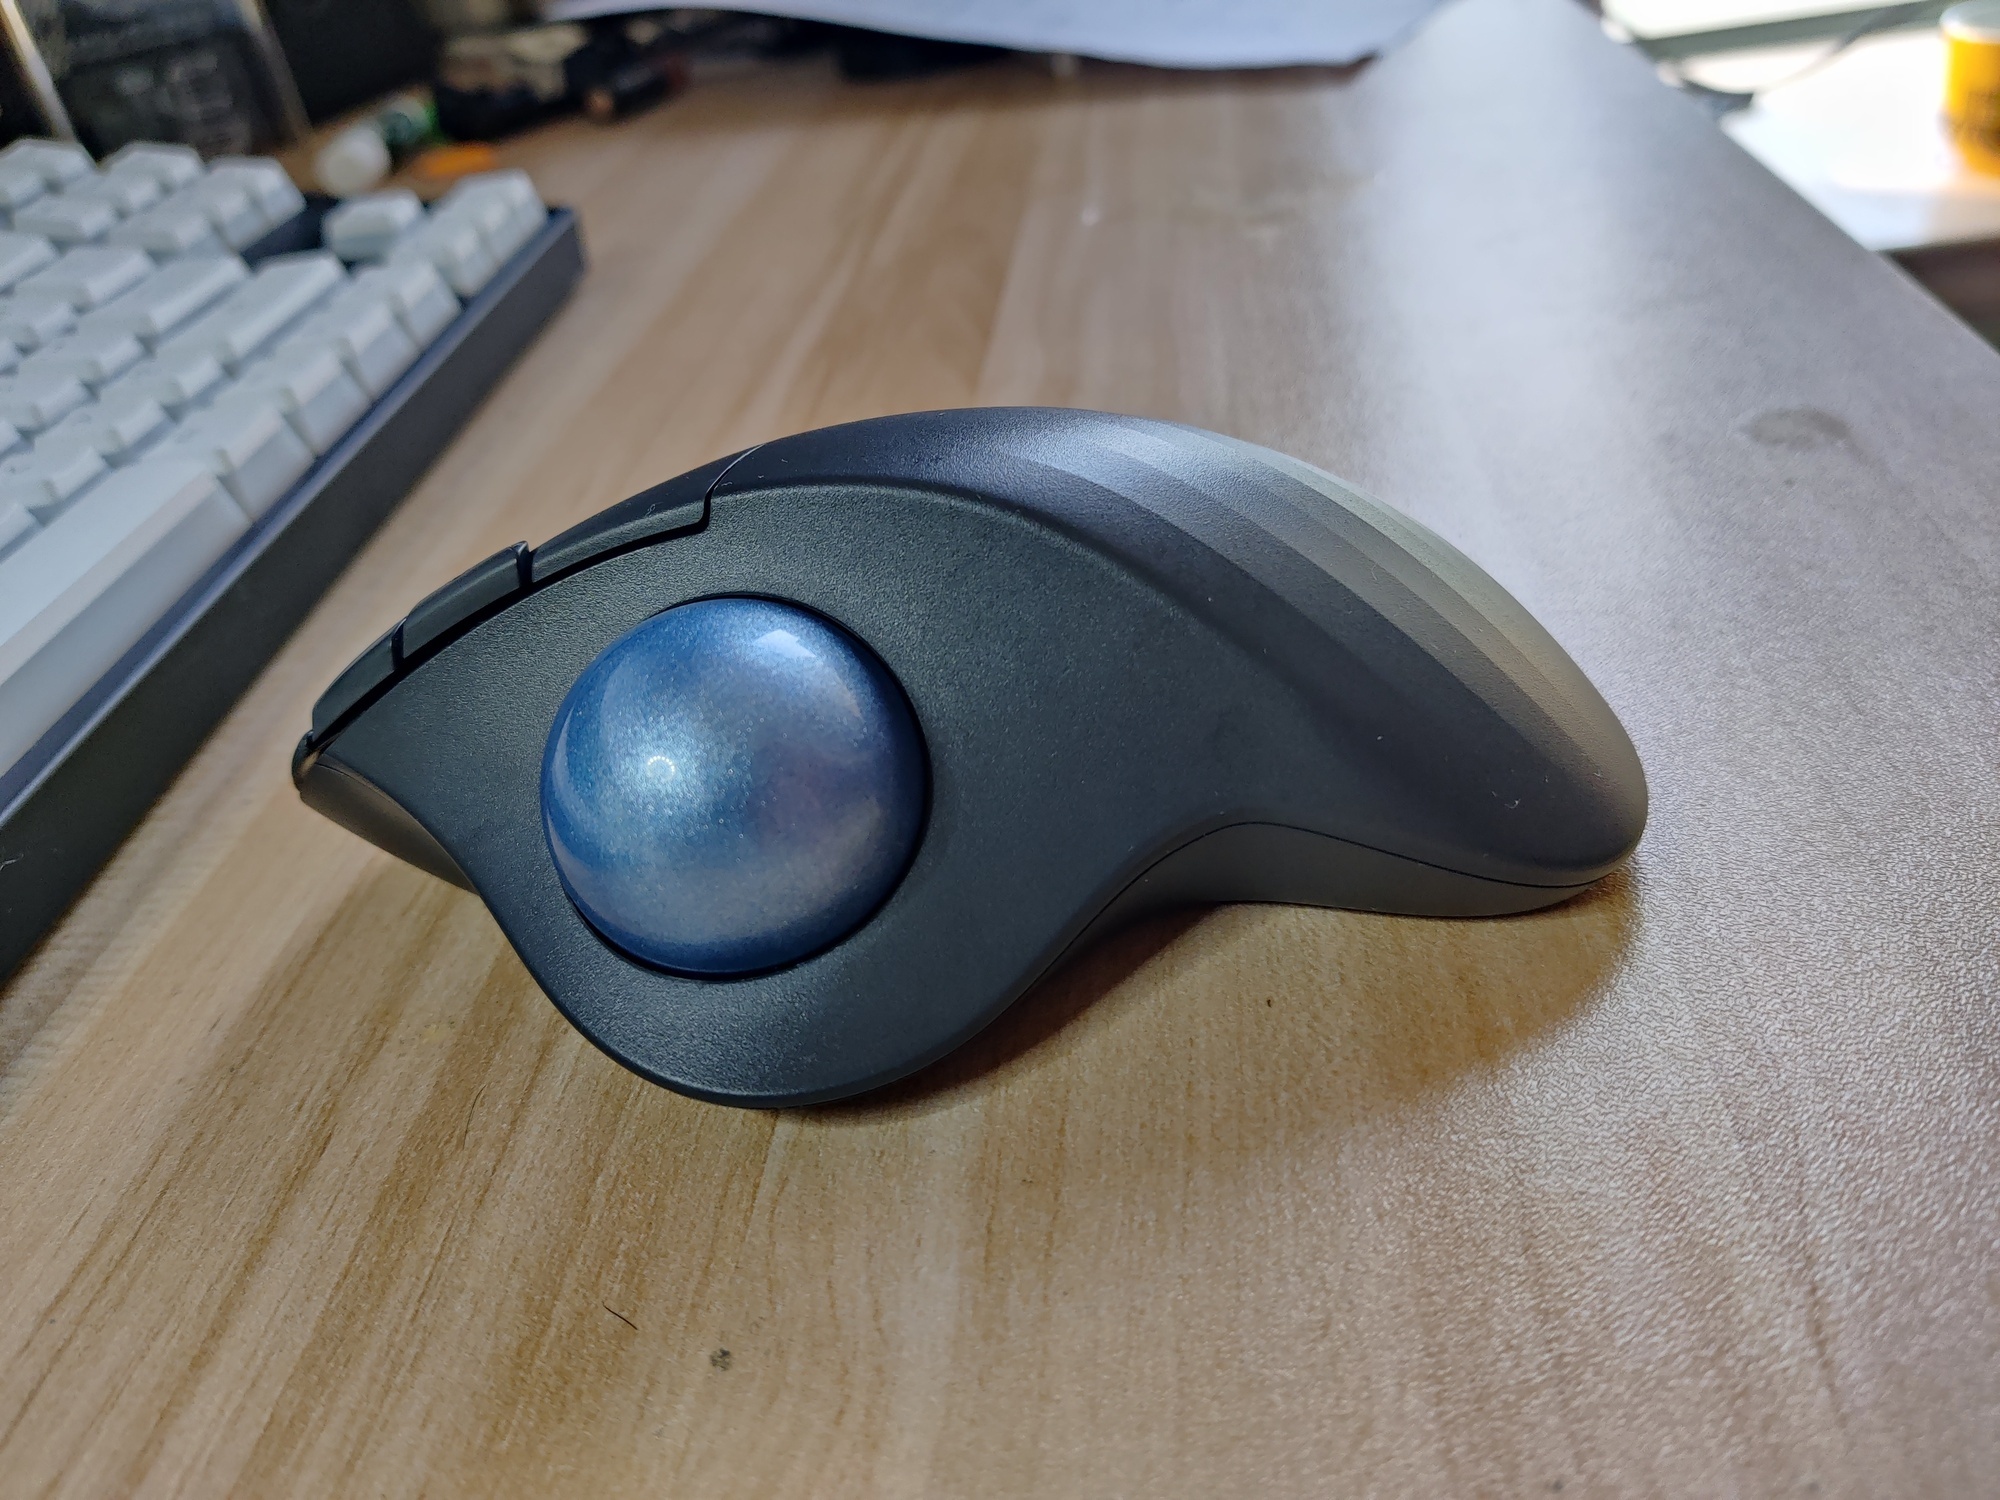 Left view. The trackball fits inside a socket.